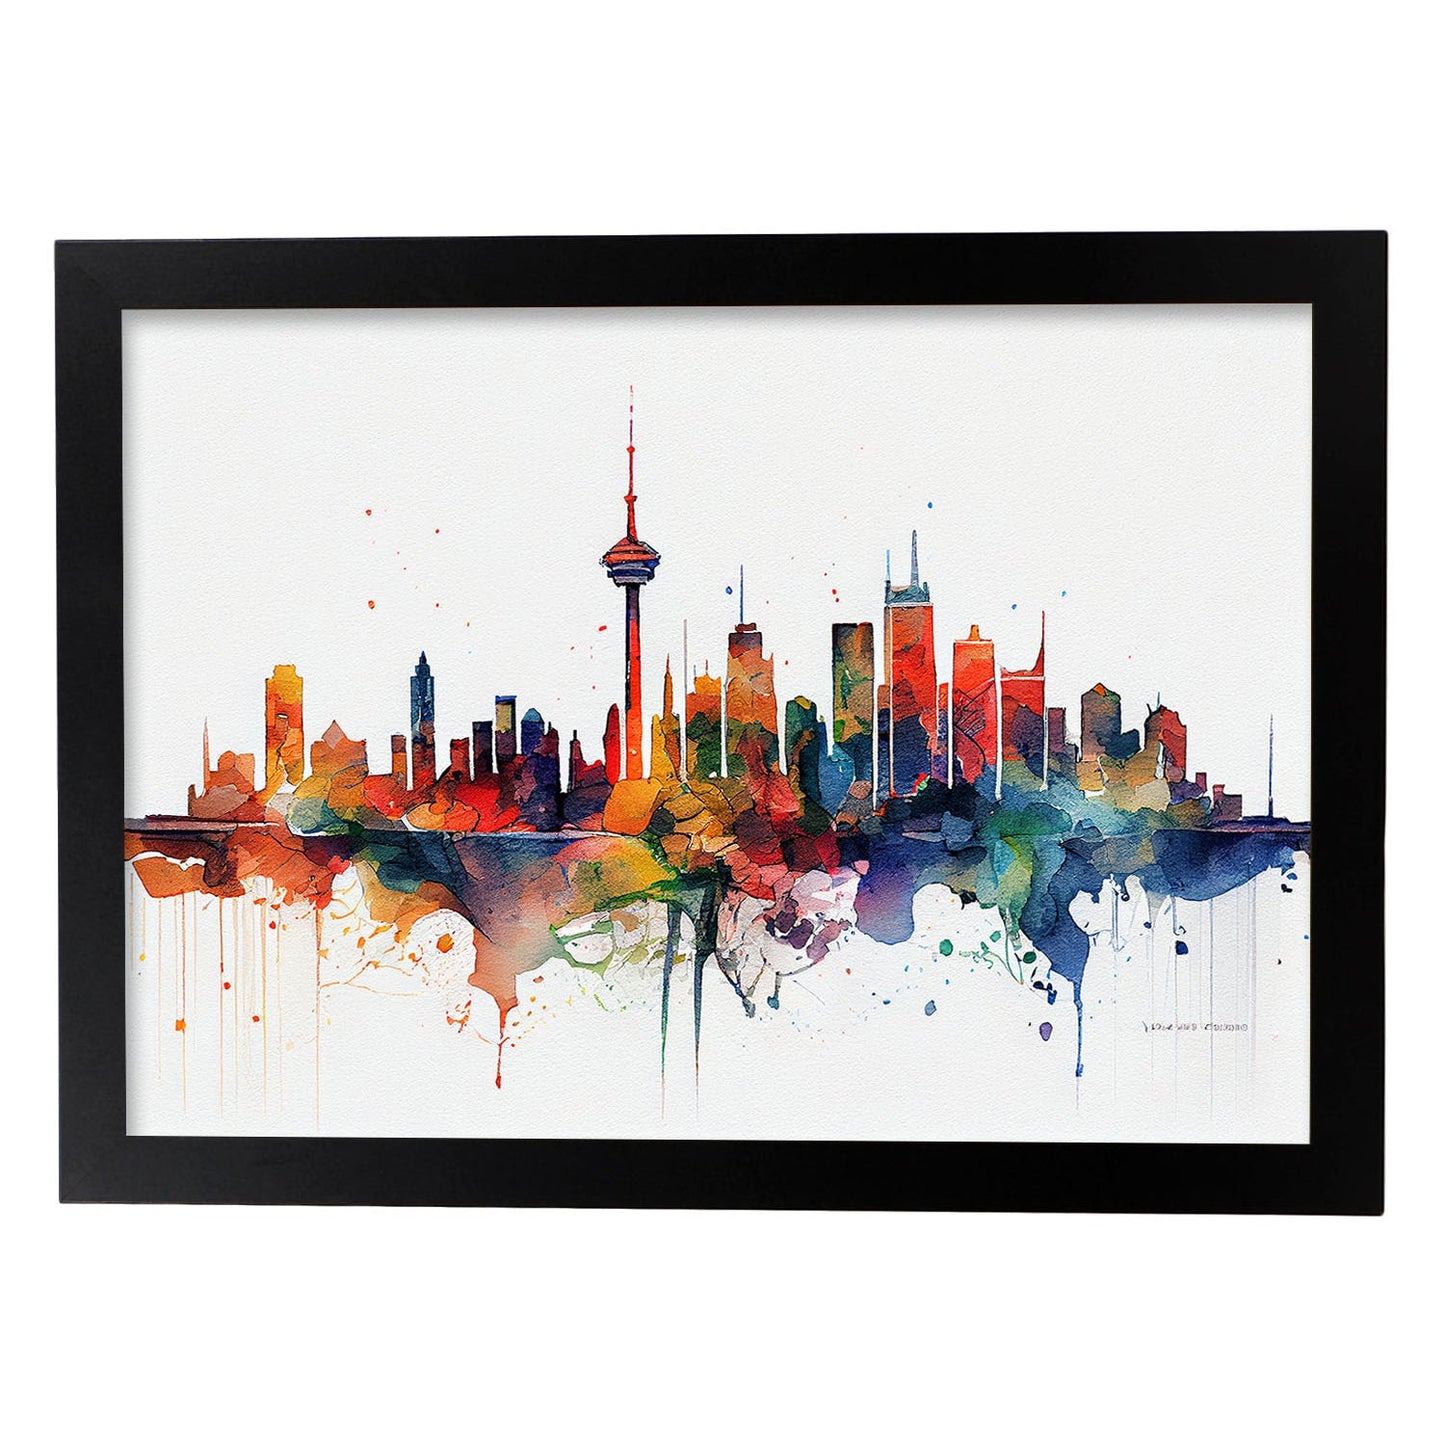 Nacnic watercolor of a skyline of the city of Toronto_2. Aesthetic Wall Art Prints for Bedroom or Living Room Design.